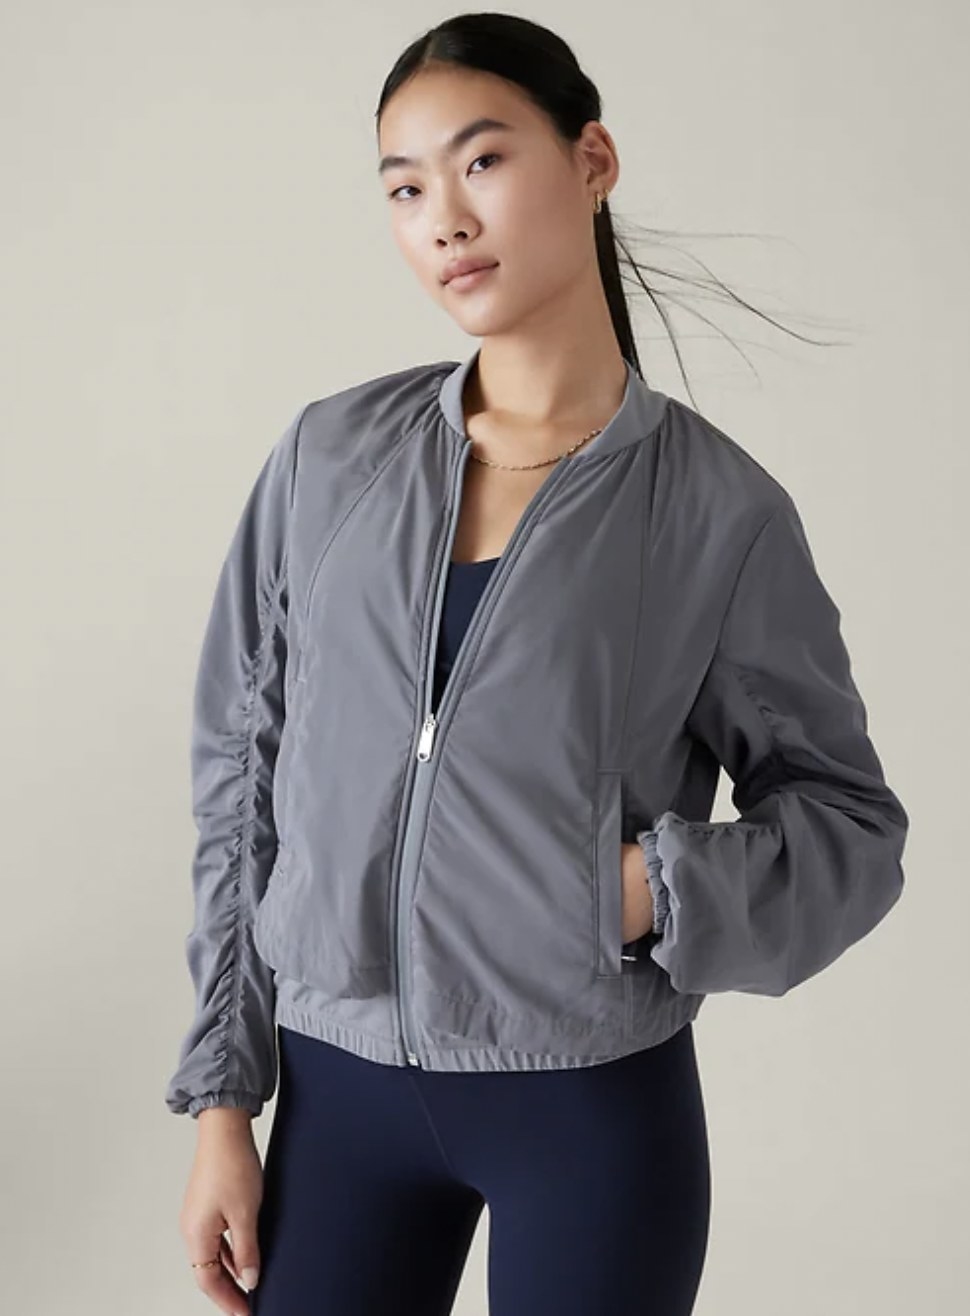 model wearing the grey jacket zipped up with left hand in pocket